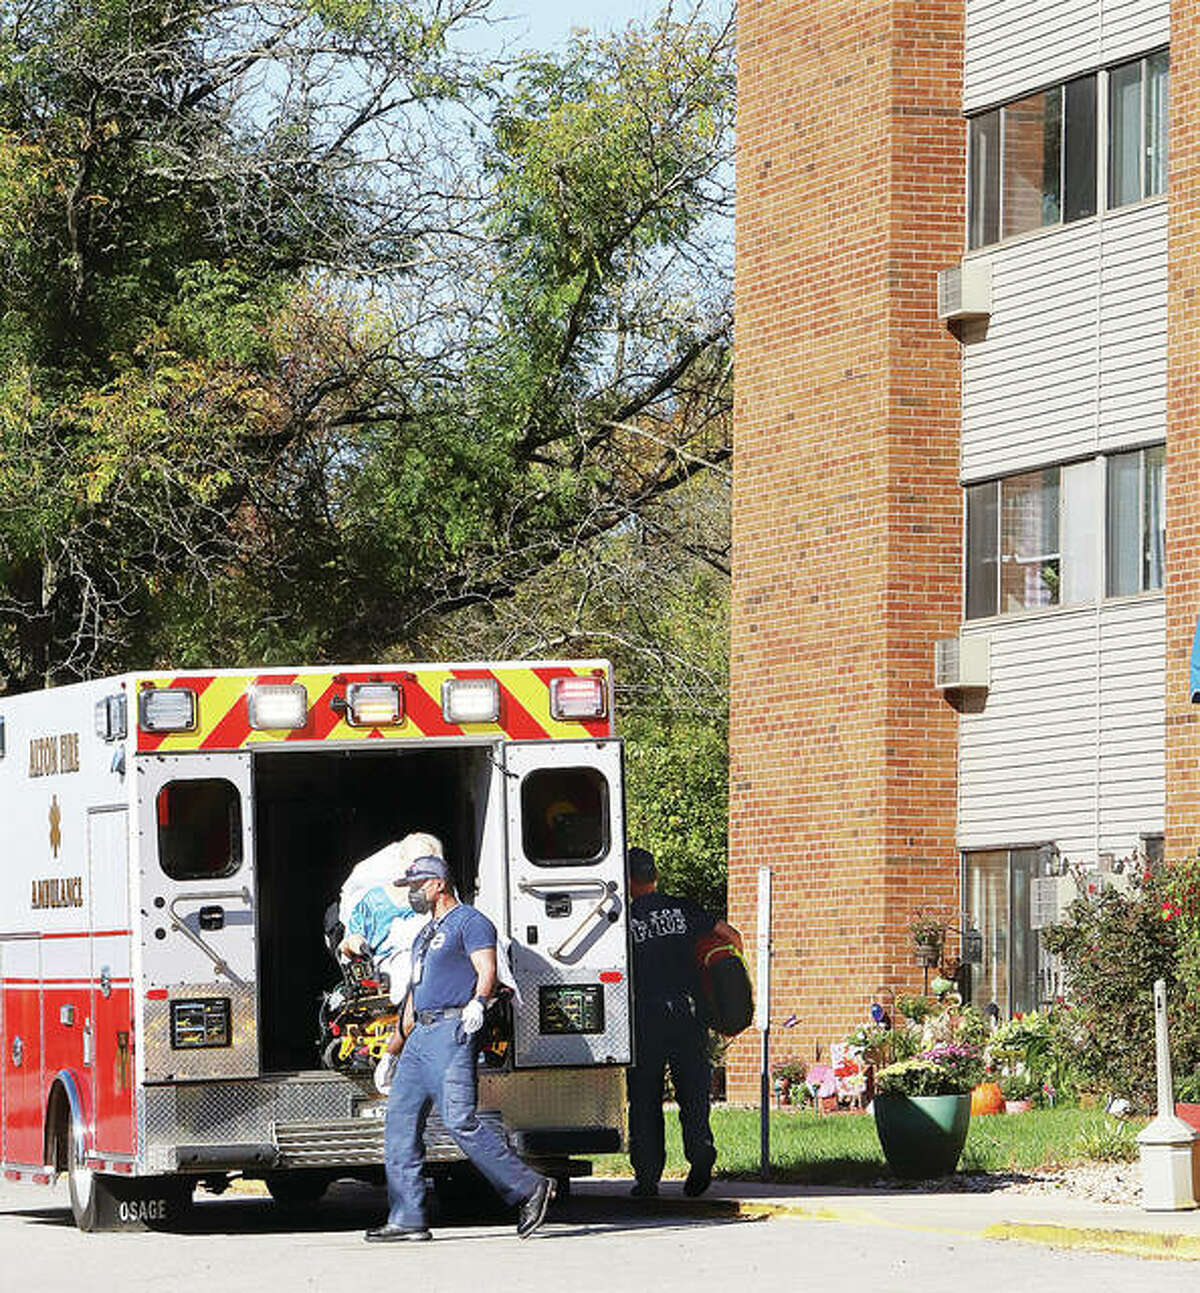 Alton Fire Department paramedics load a fourth-floor resident of Skyline Towers senior apartments into an ambulance Monday after she suffered a medical problem. Firefighters brought her downstairs on the smaller of two elevators located in the building. Over the weekend, both elevators were out, essentially trapping the elderly residents who could not use the stairs. The situation creates problems for firefighters, who without the elevators, would have to carry sick residents down the stairs of the five-story building. Residents reported that shortly after this rescue call, the second elevator broke again, leaving them stranded.